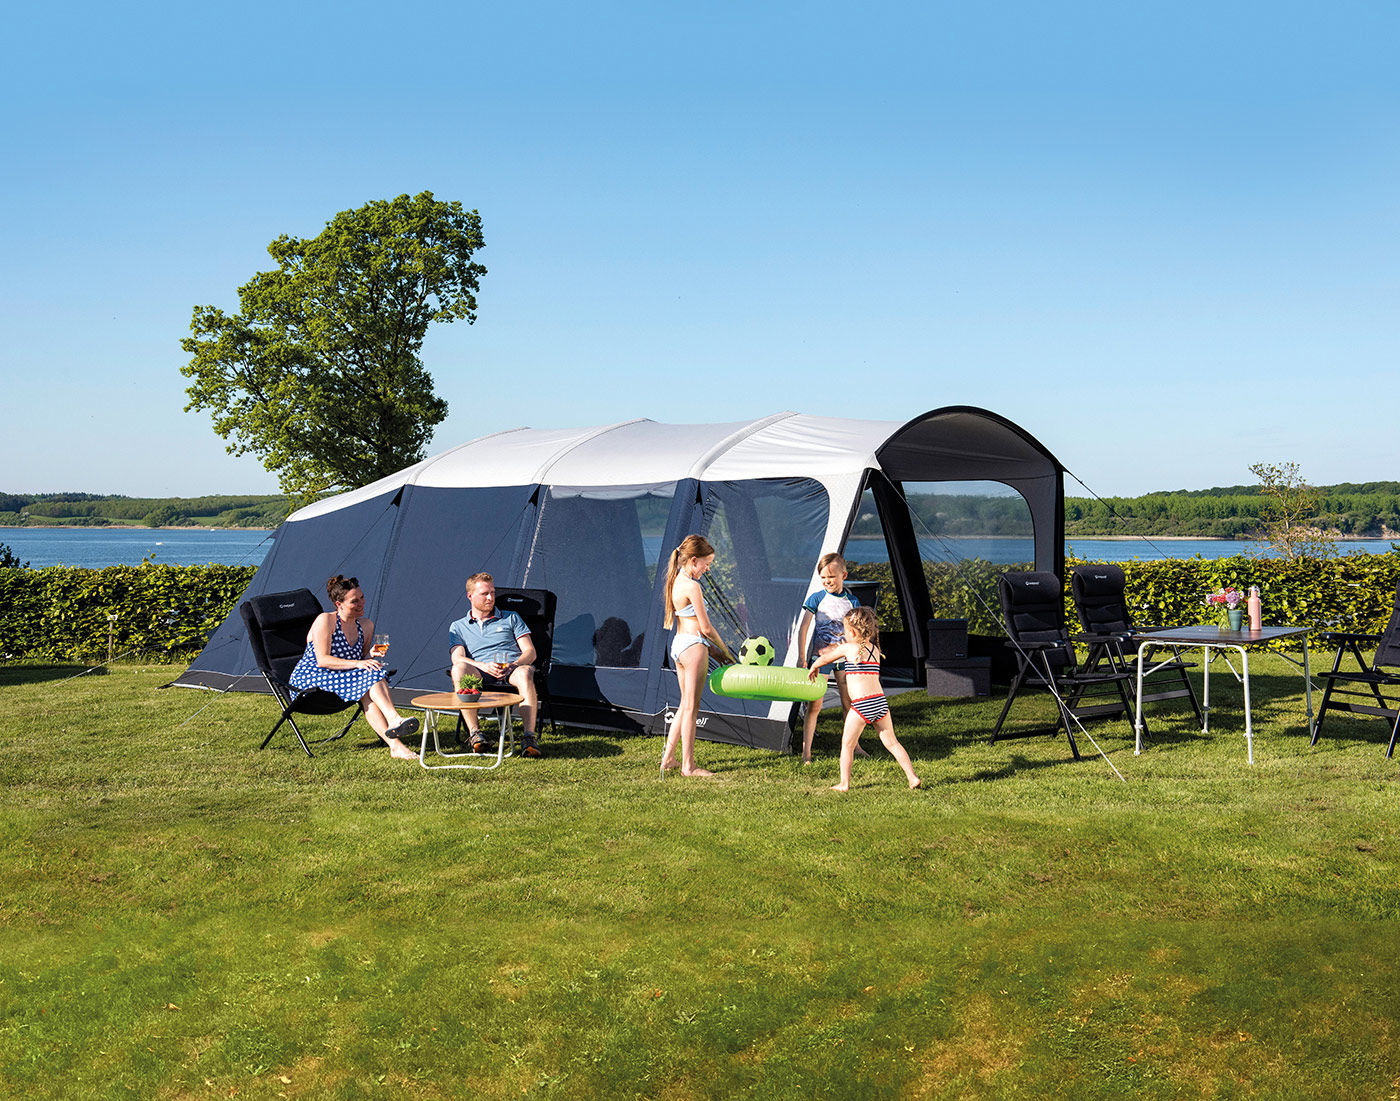 Outwell Imperial Air Inflatable family tents 2019